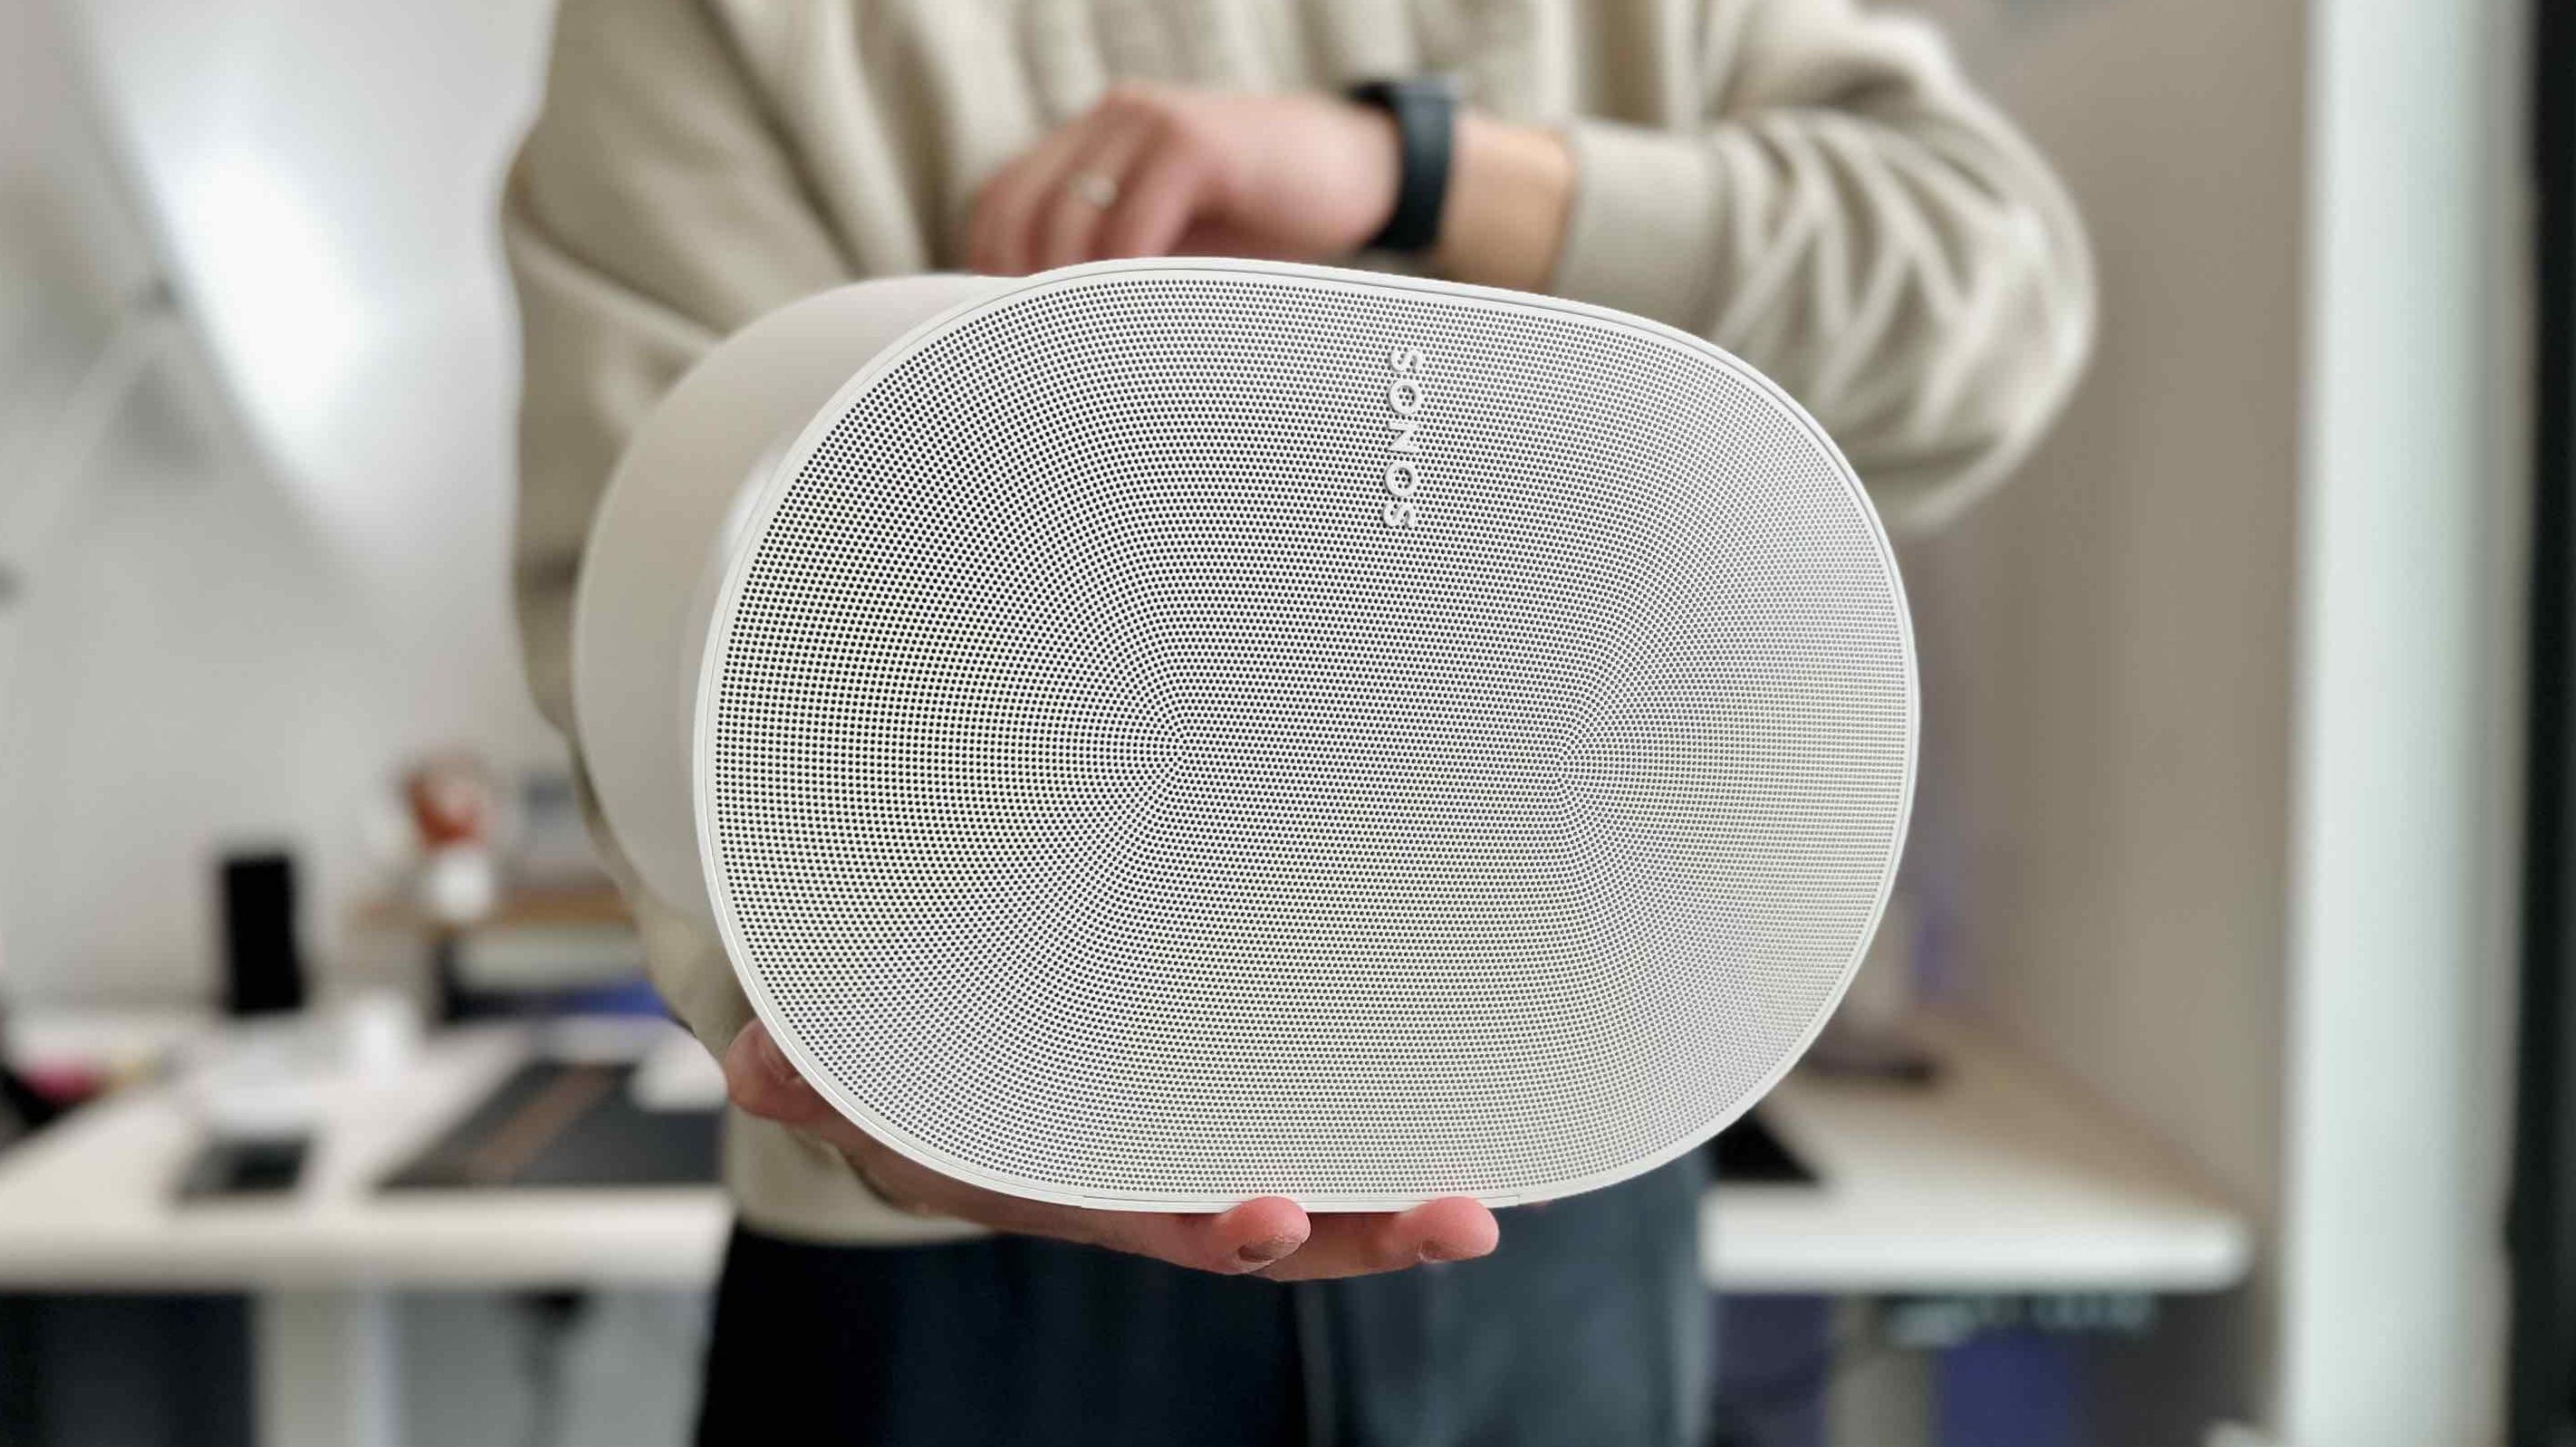 All New Sonos Era 300 Packs an Impressive Punch - 9to5Mac